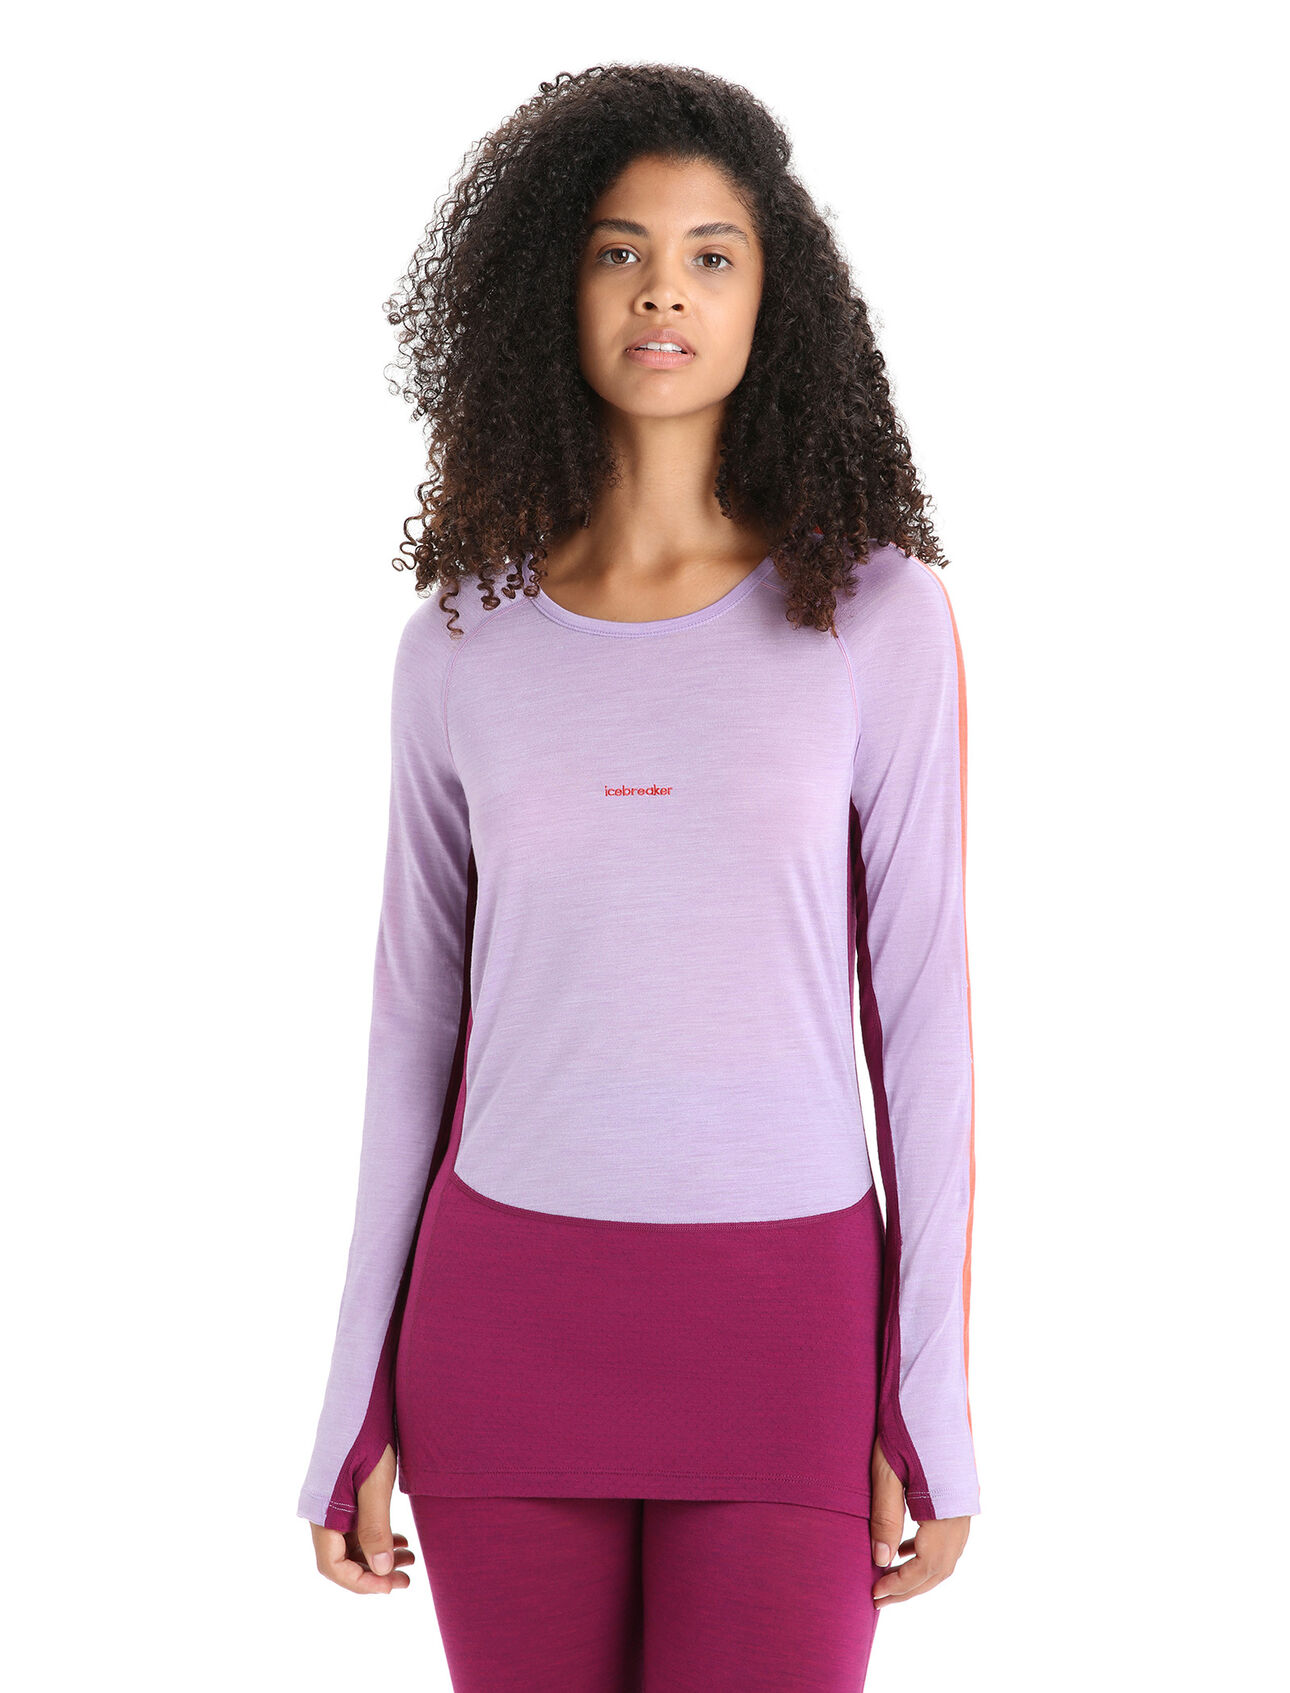 Womens 125 ZoneKnit™ Merino Blend Long Sleeve Crewe Thermal Top An ultralight merino base layer top designed to help regulate body temperature during high-intensity activity, the 125 ZoneKnit™ Long Sleeve Crewe features our jersey Cool-Lite™ fabric for adventure and everyday training.